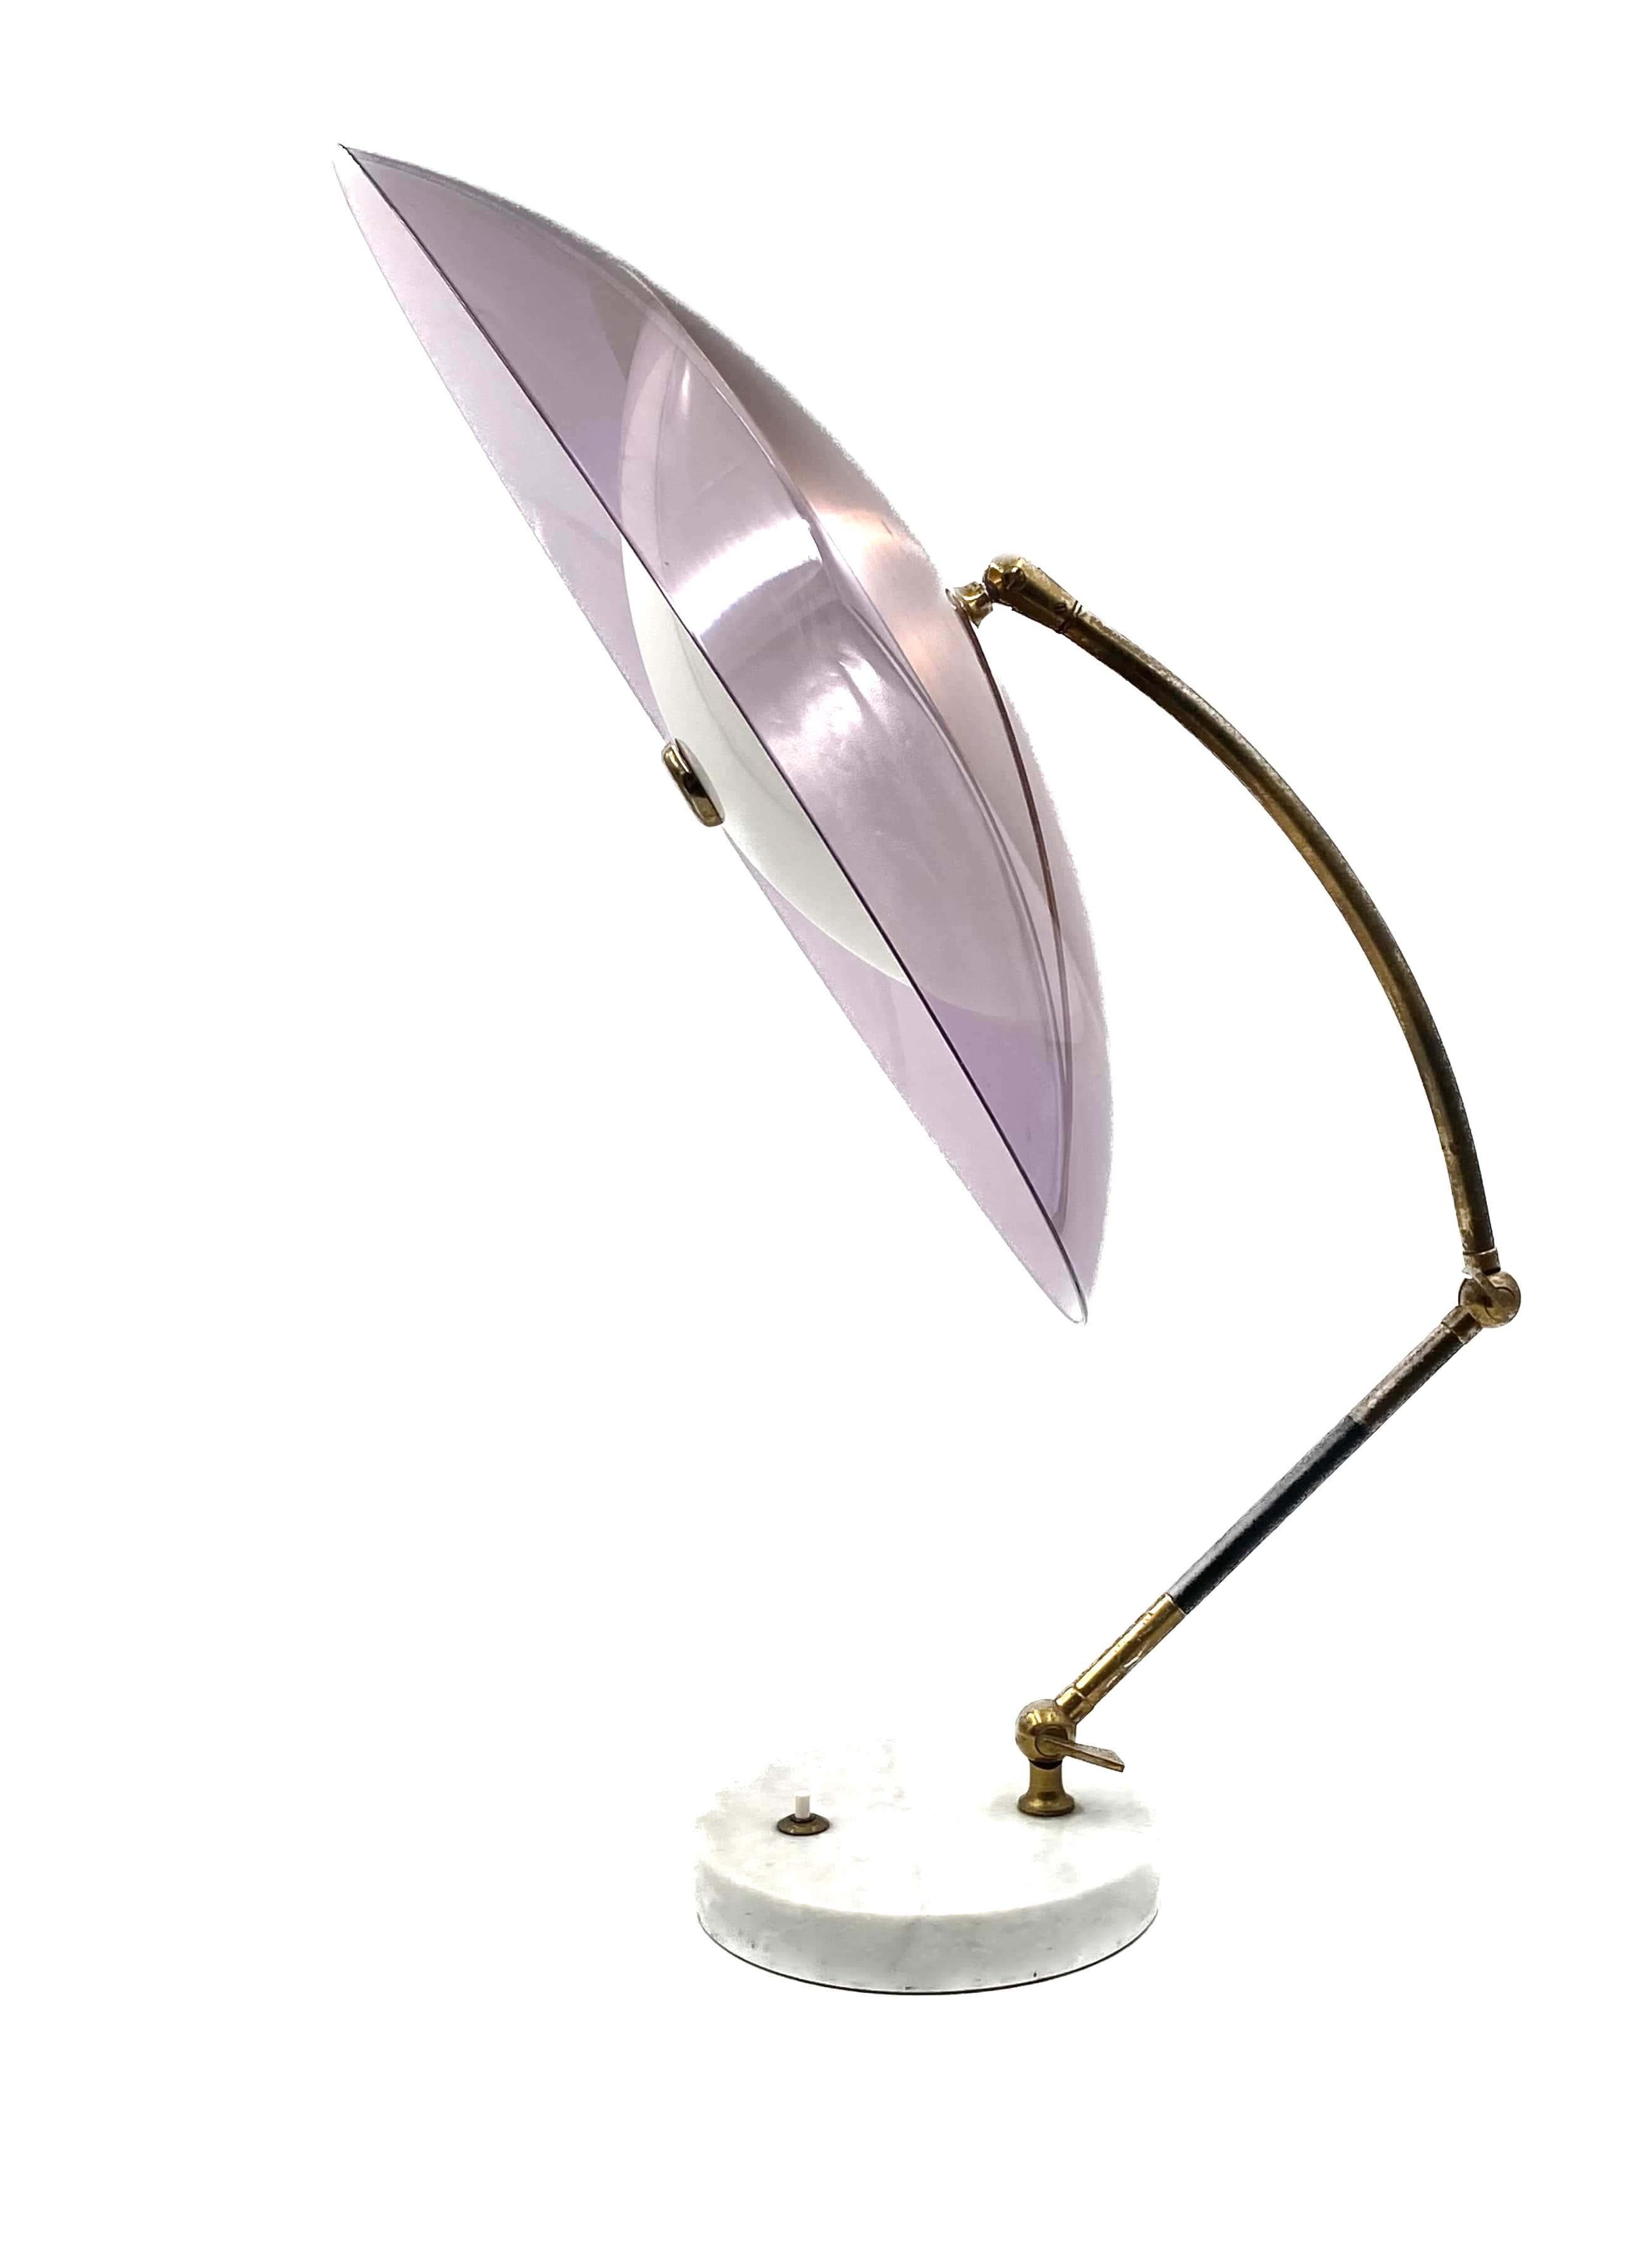 Stilux, mod. Orleans dome table lamp, Stilux Milano Italy, 1955 For Sale 8